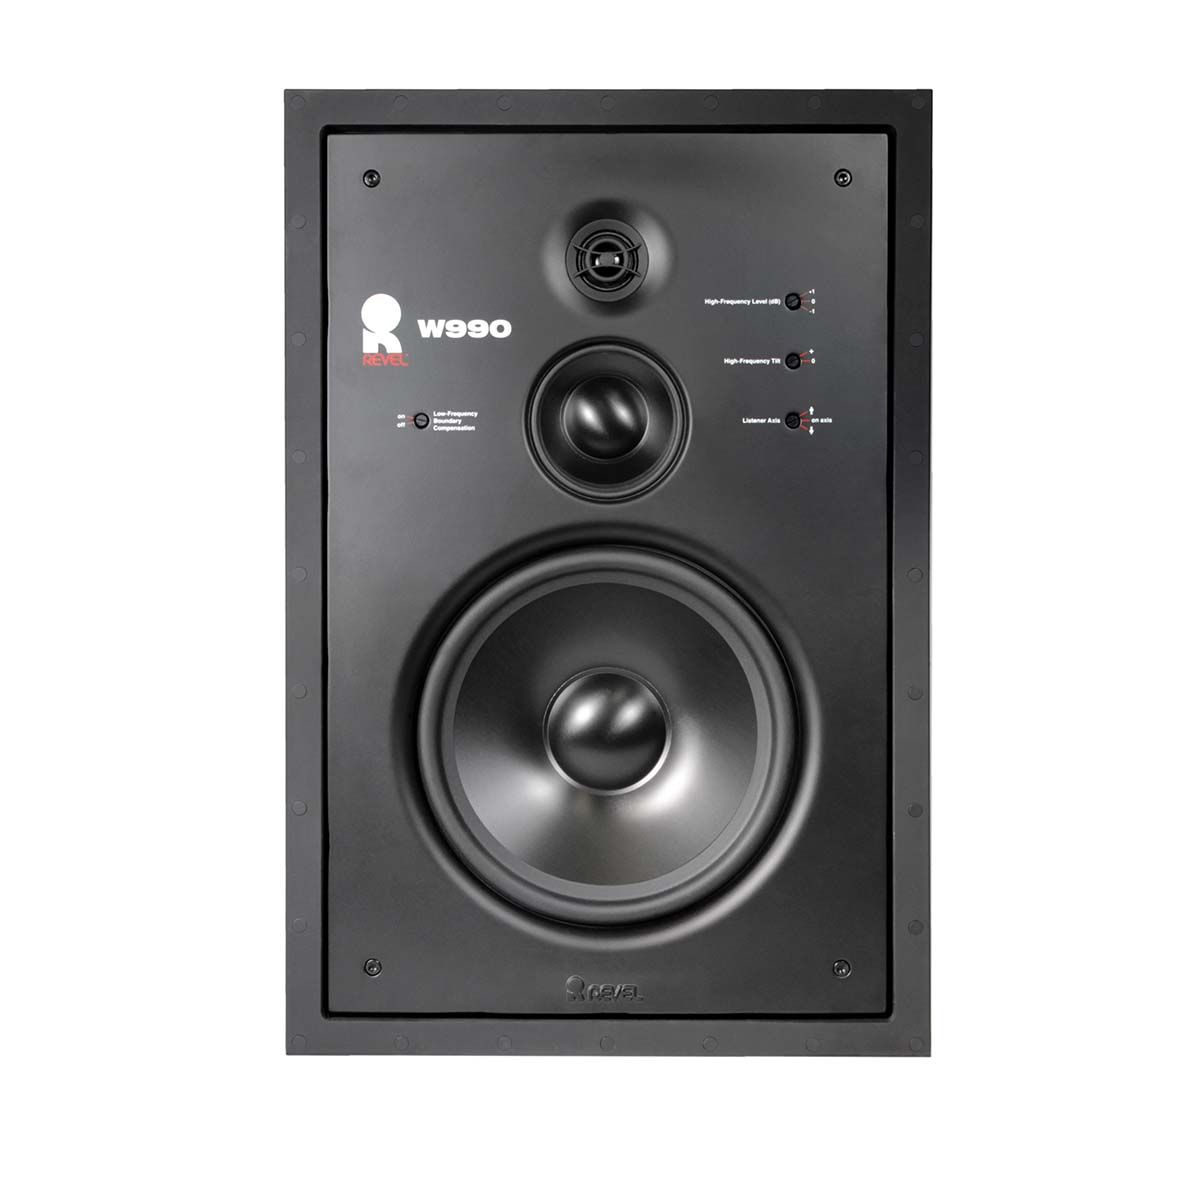 Revel W990 In-Wall Speaker, front view without grille